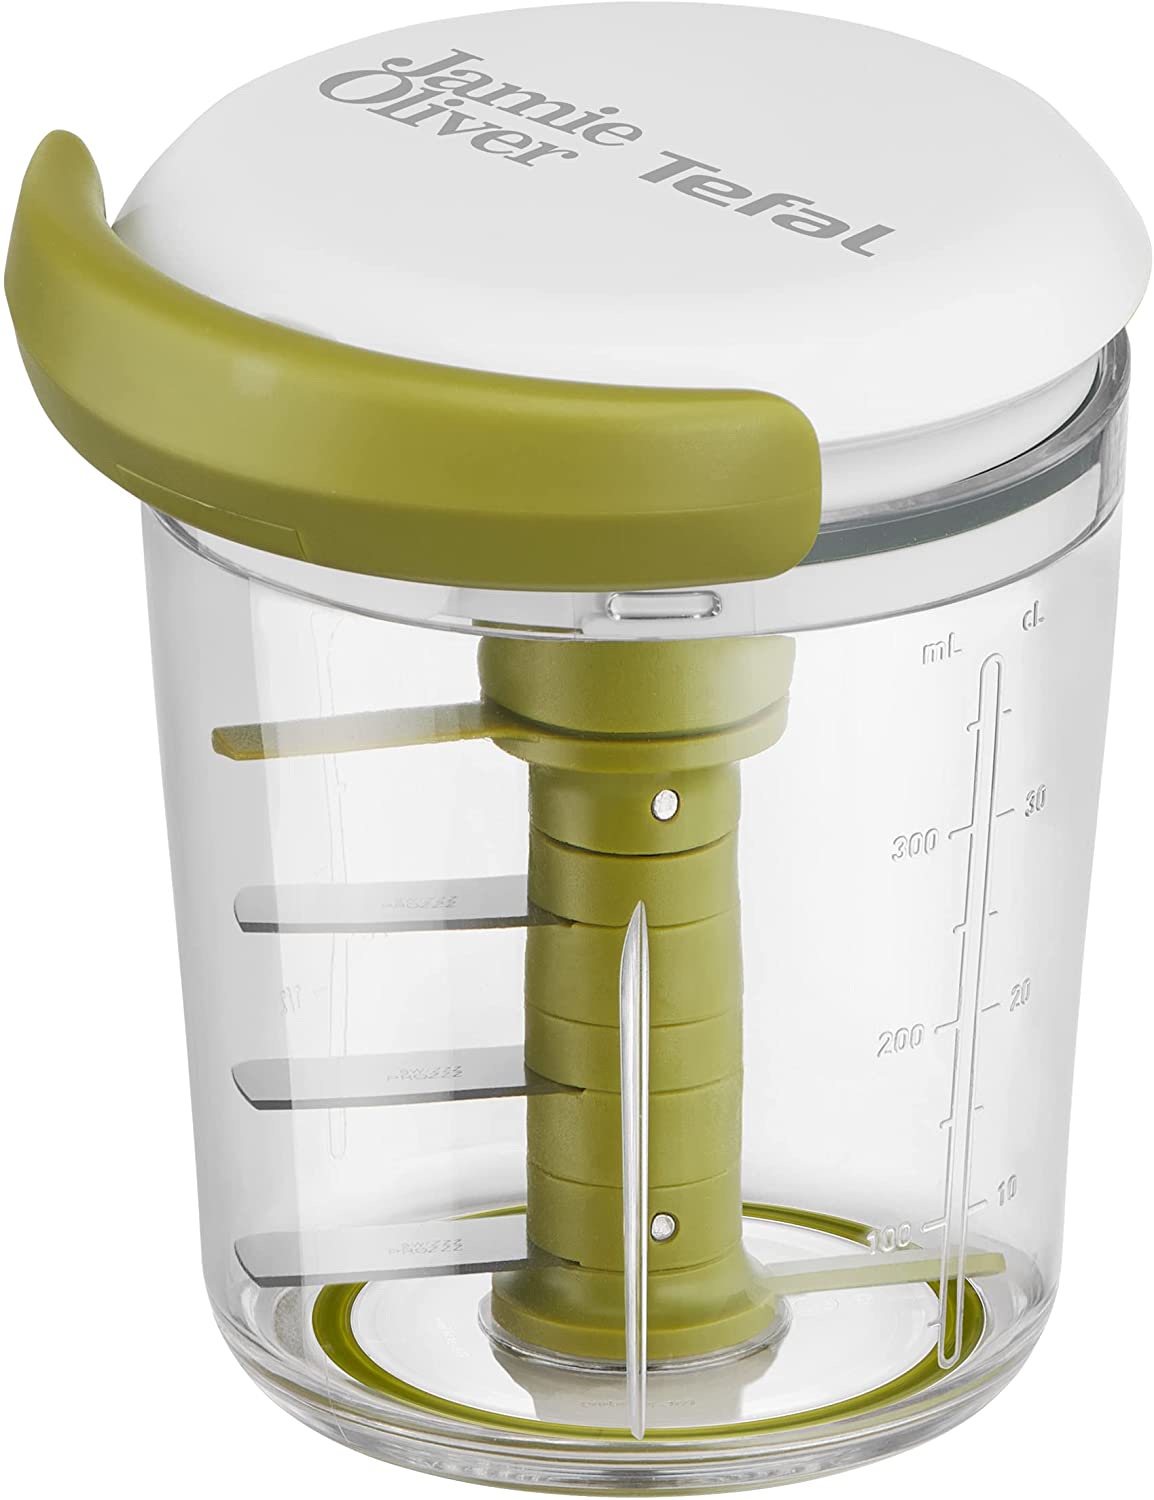 Tefal K16441 Jamie Oliver Chop & Shaker | No Electricity | Capacity: 450 ml | Multi Chopper | Universal Chopper for Vegetables, Fruits, Onions, Nuts, Garlic | White/Green